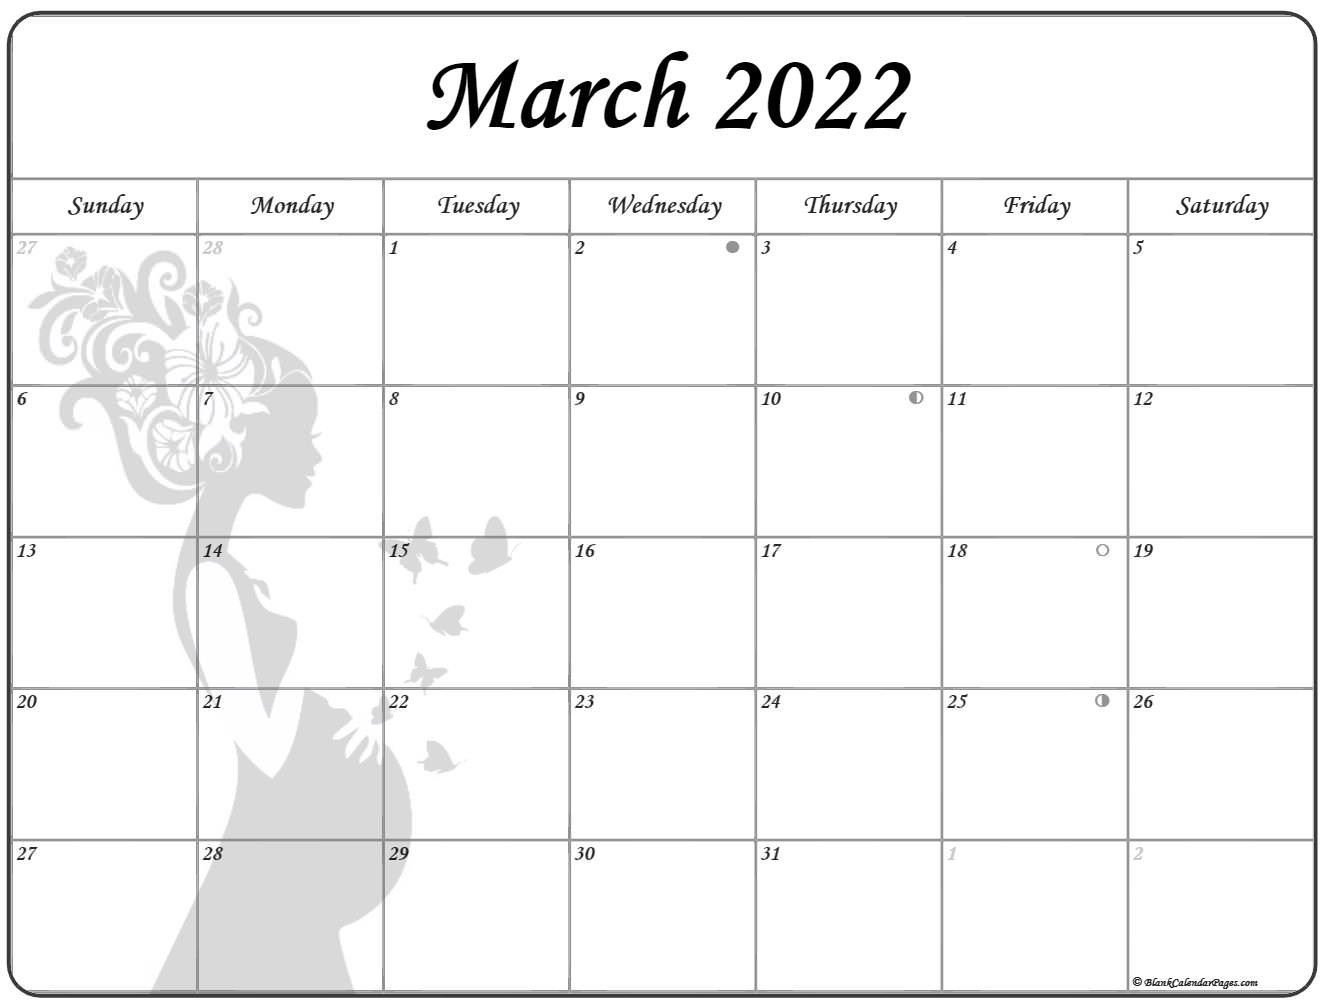 Collection Of March 2022 Photo Calendars With Image Filters.  Moon Calendar June 2022